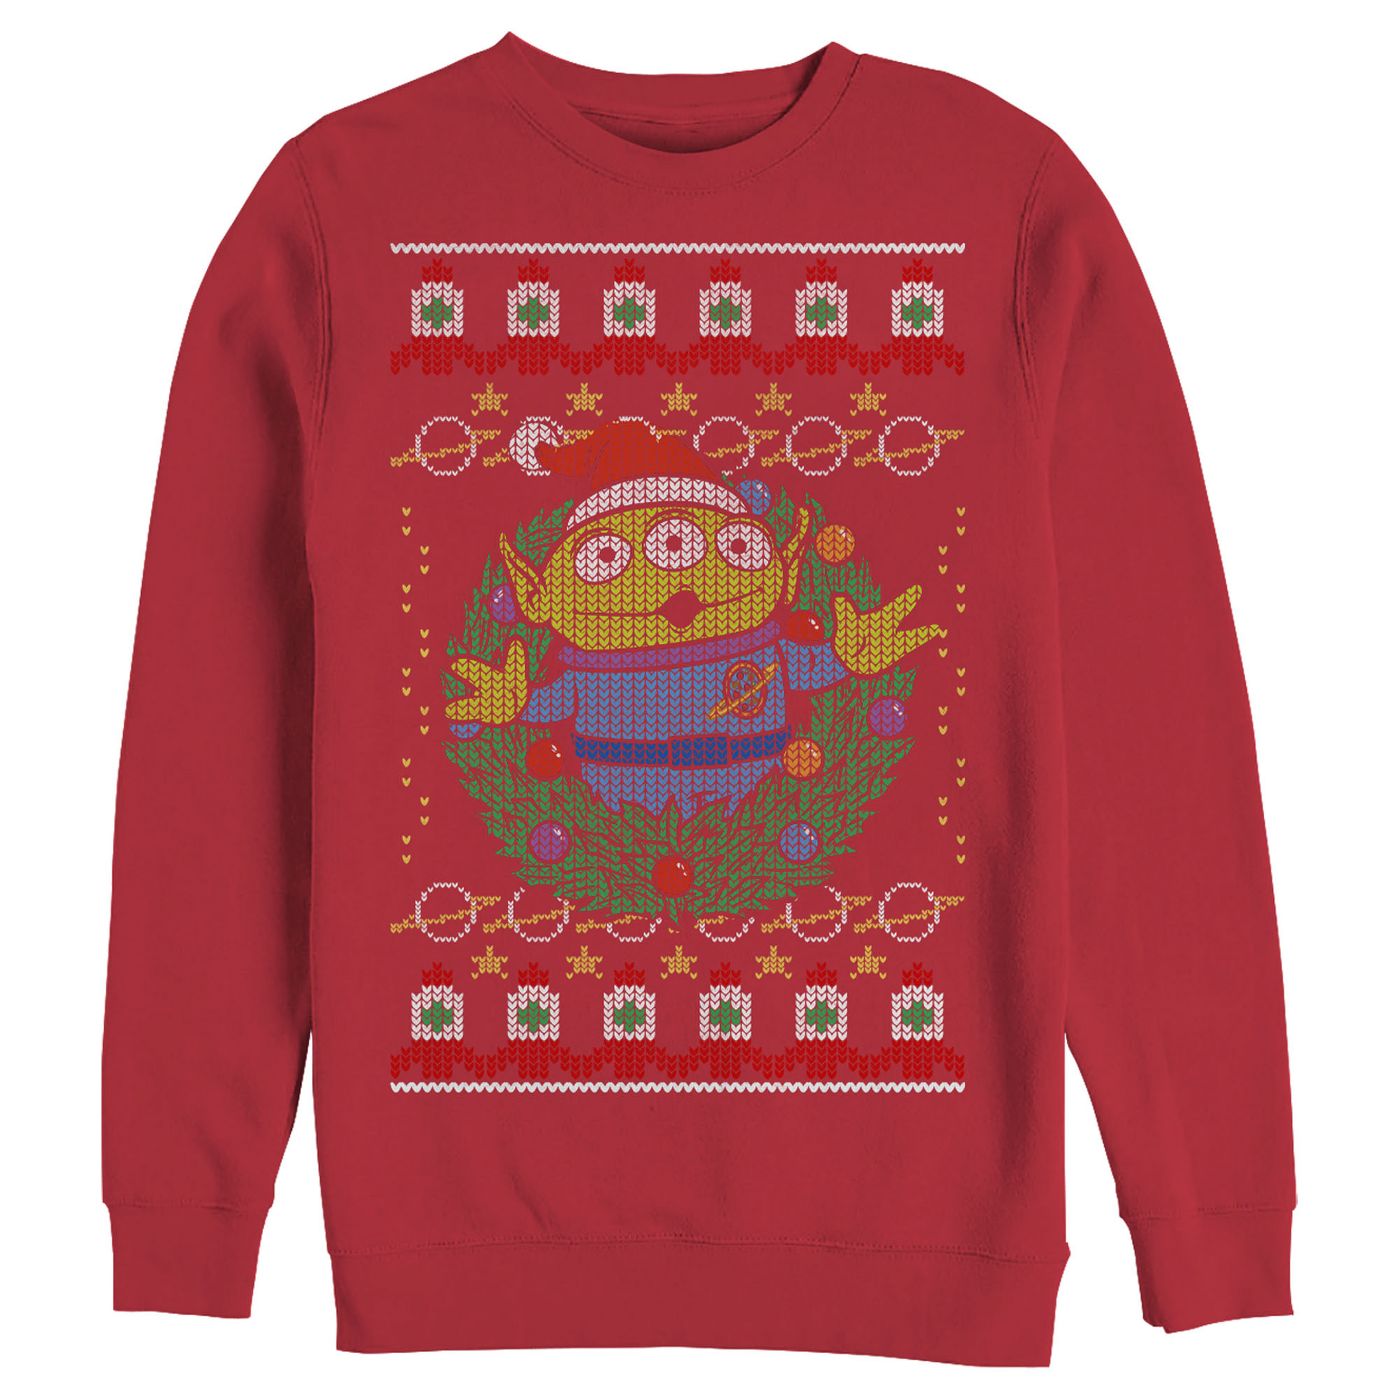 toy story Christmas sweater